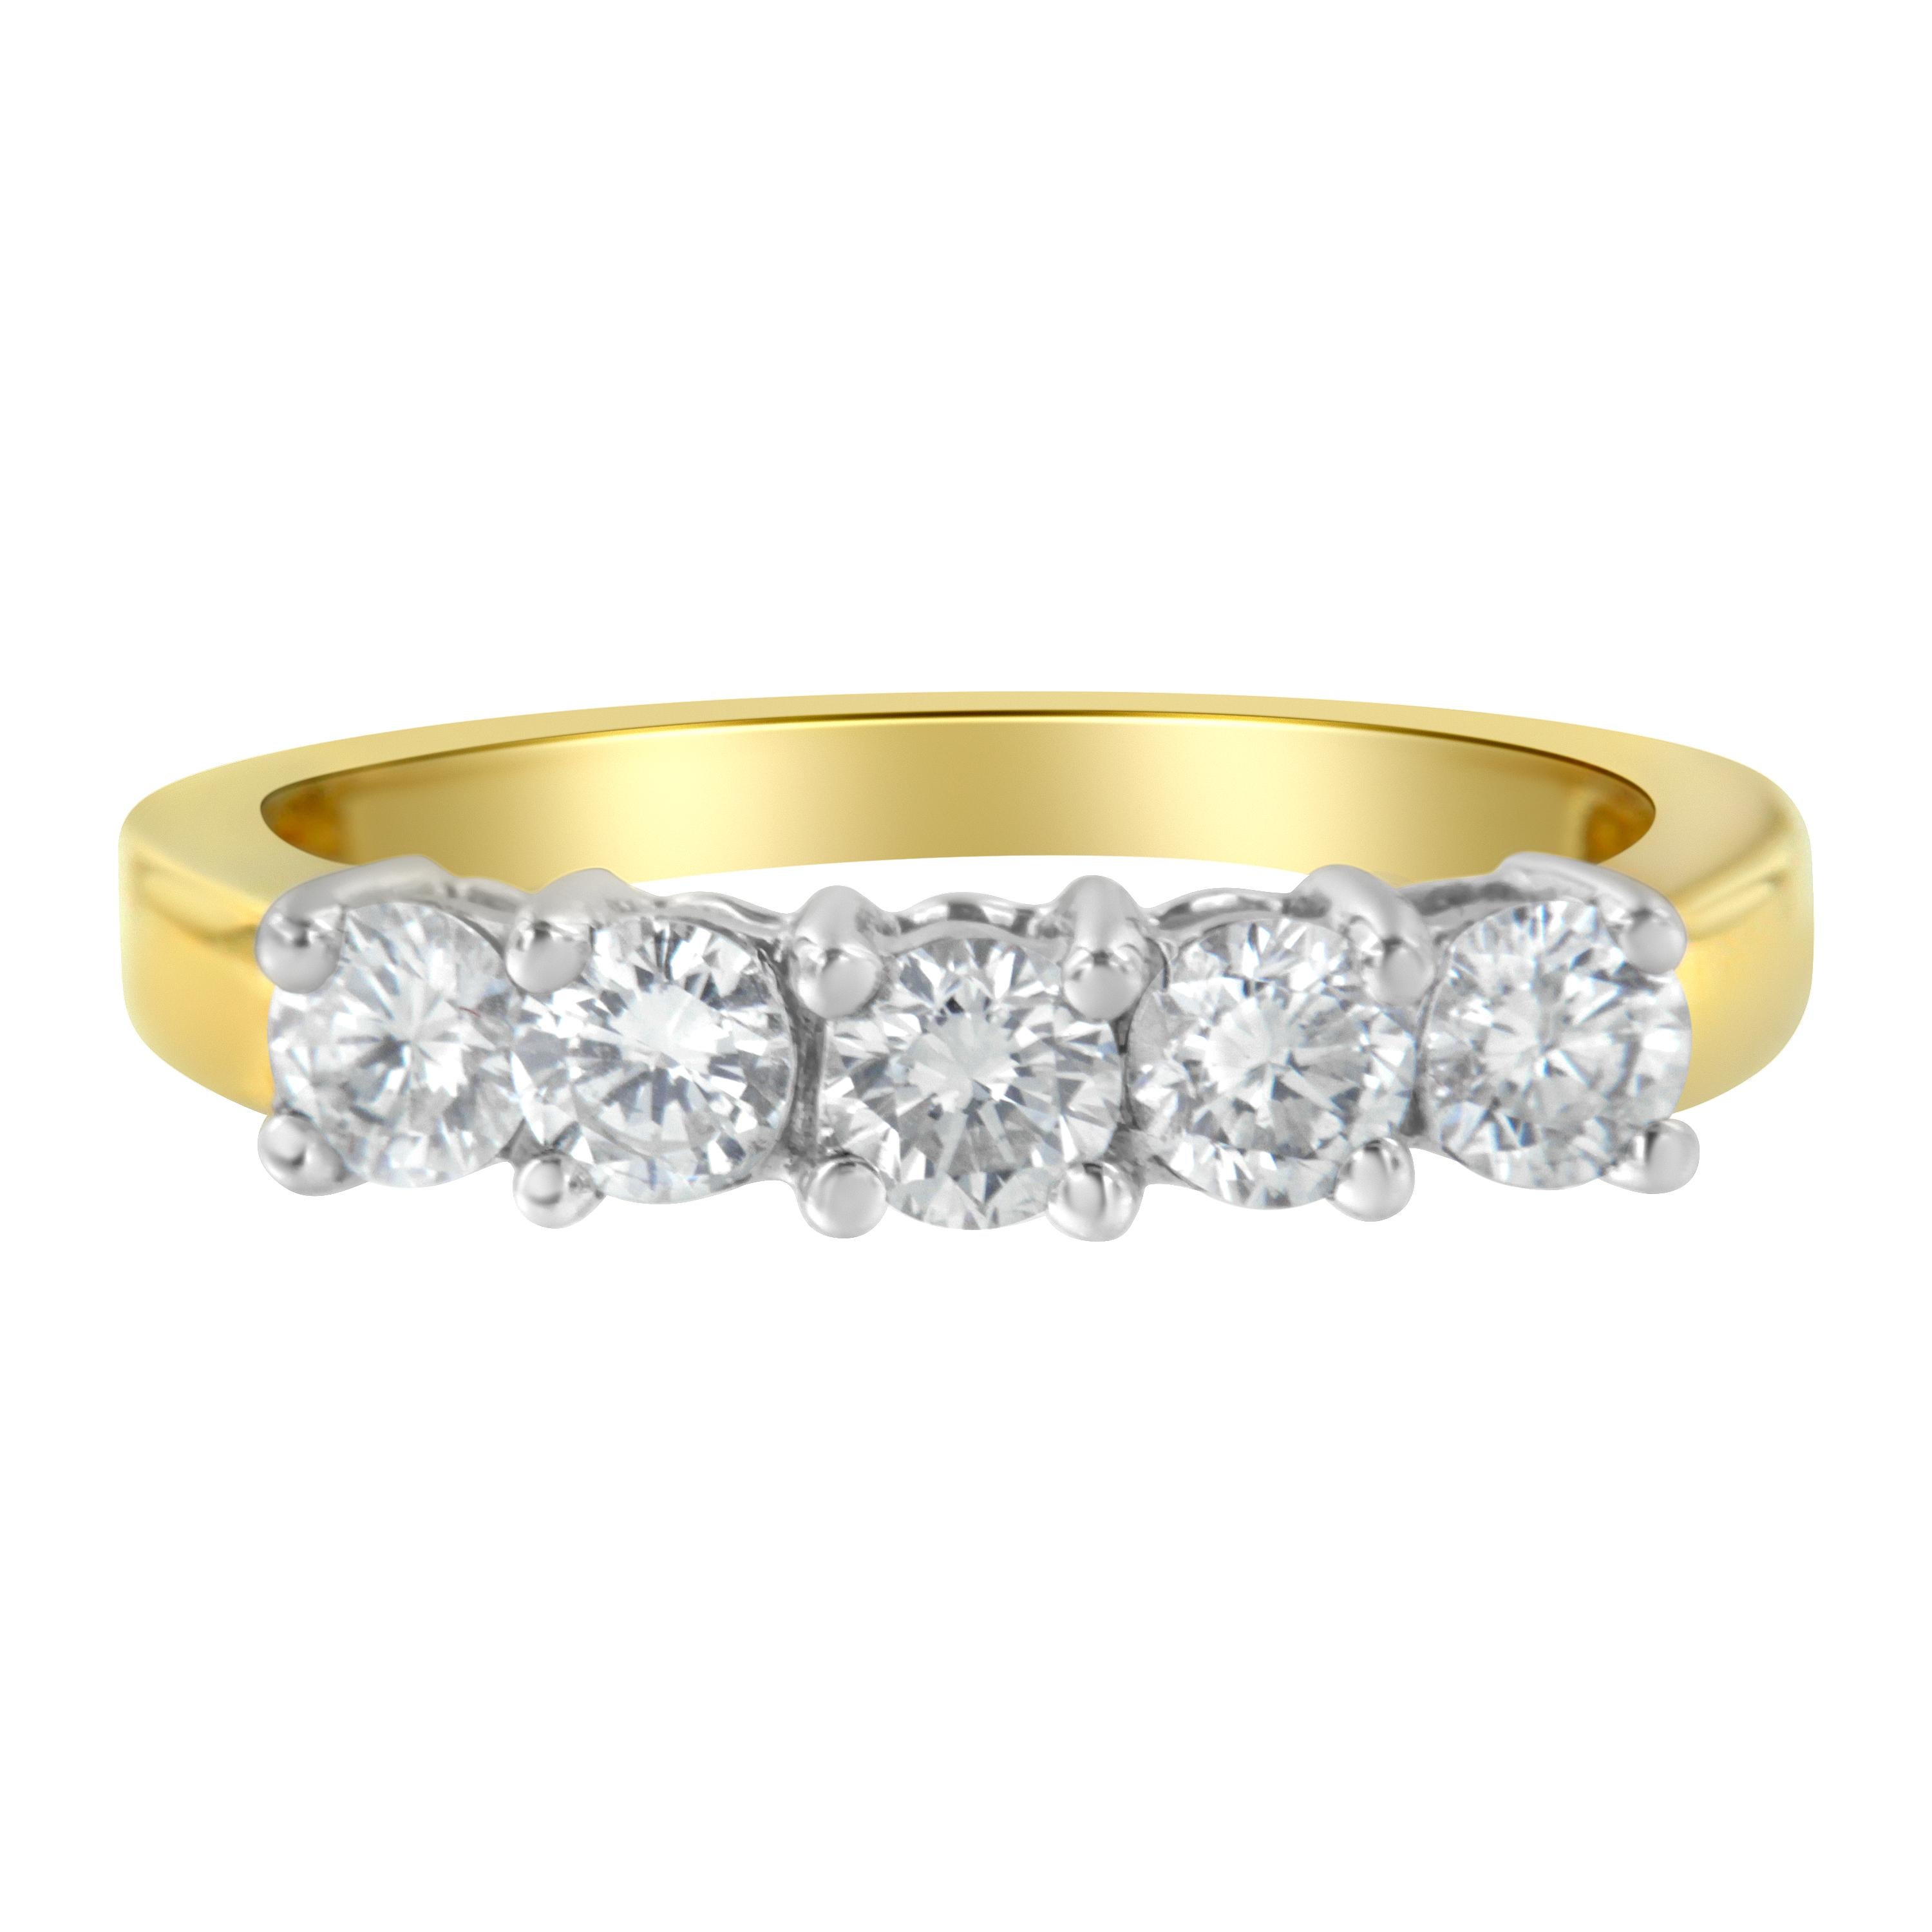 A luxurious 5 stone gold and diamond ring. This stunning ring has 5 round-cut, natural diamonds set in a prong setting. The beautiful diamonds are set in lustrous 14k two-toned gold. 

'Video Available Upon Request'

Product features:

Diamond Type: